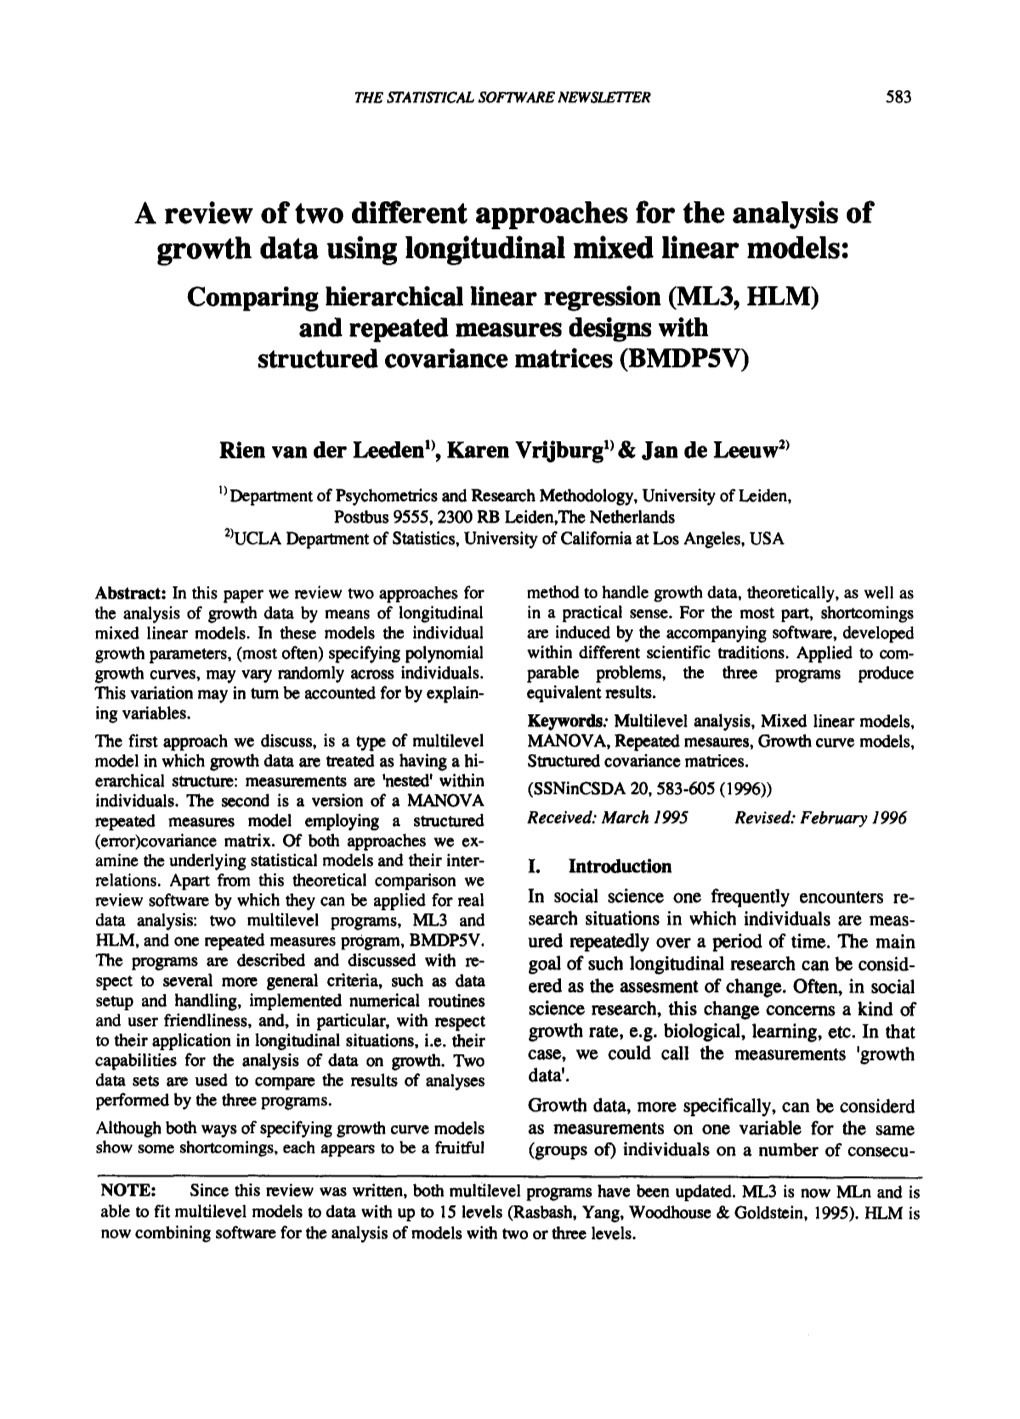 A Review of Two Different Approaches for the Analysis of Growth Data Using